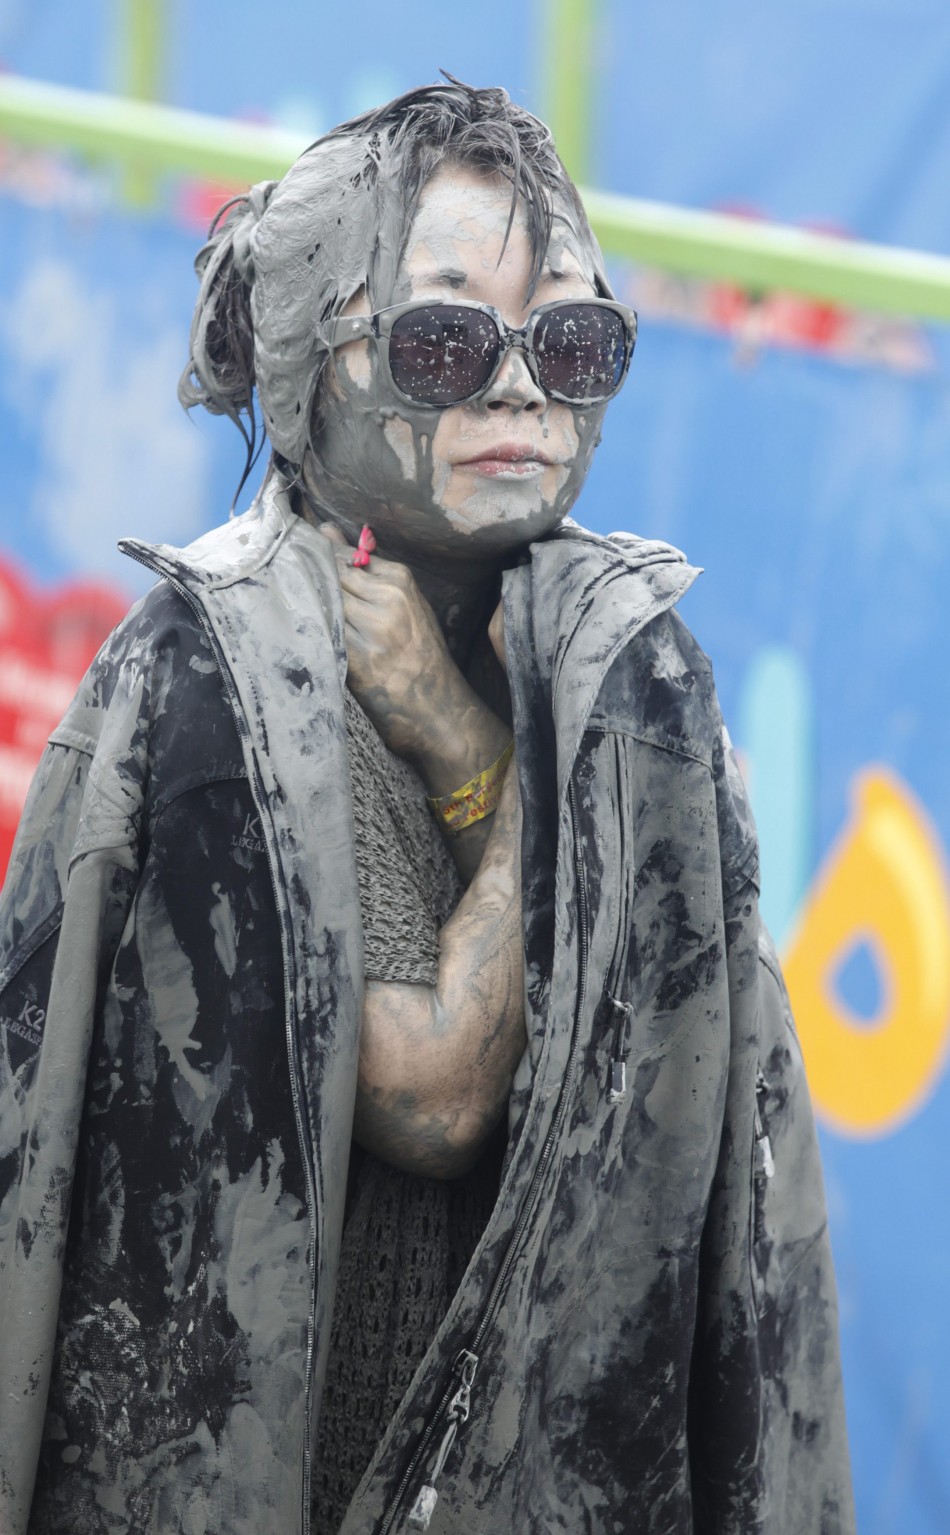 A woman wears a jacket to warm herself during the Boryeong Mud Festival at Daecheon beach in Boryeong